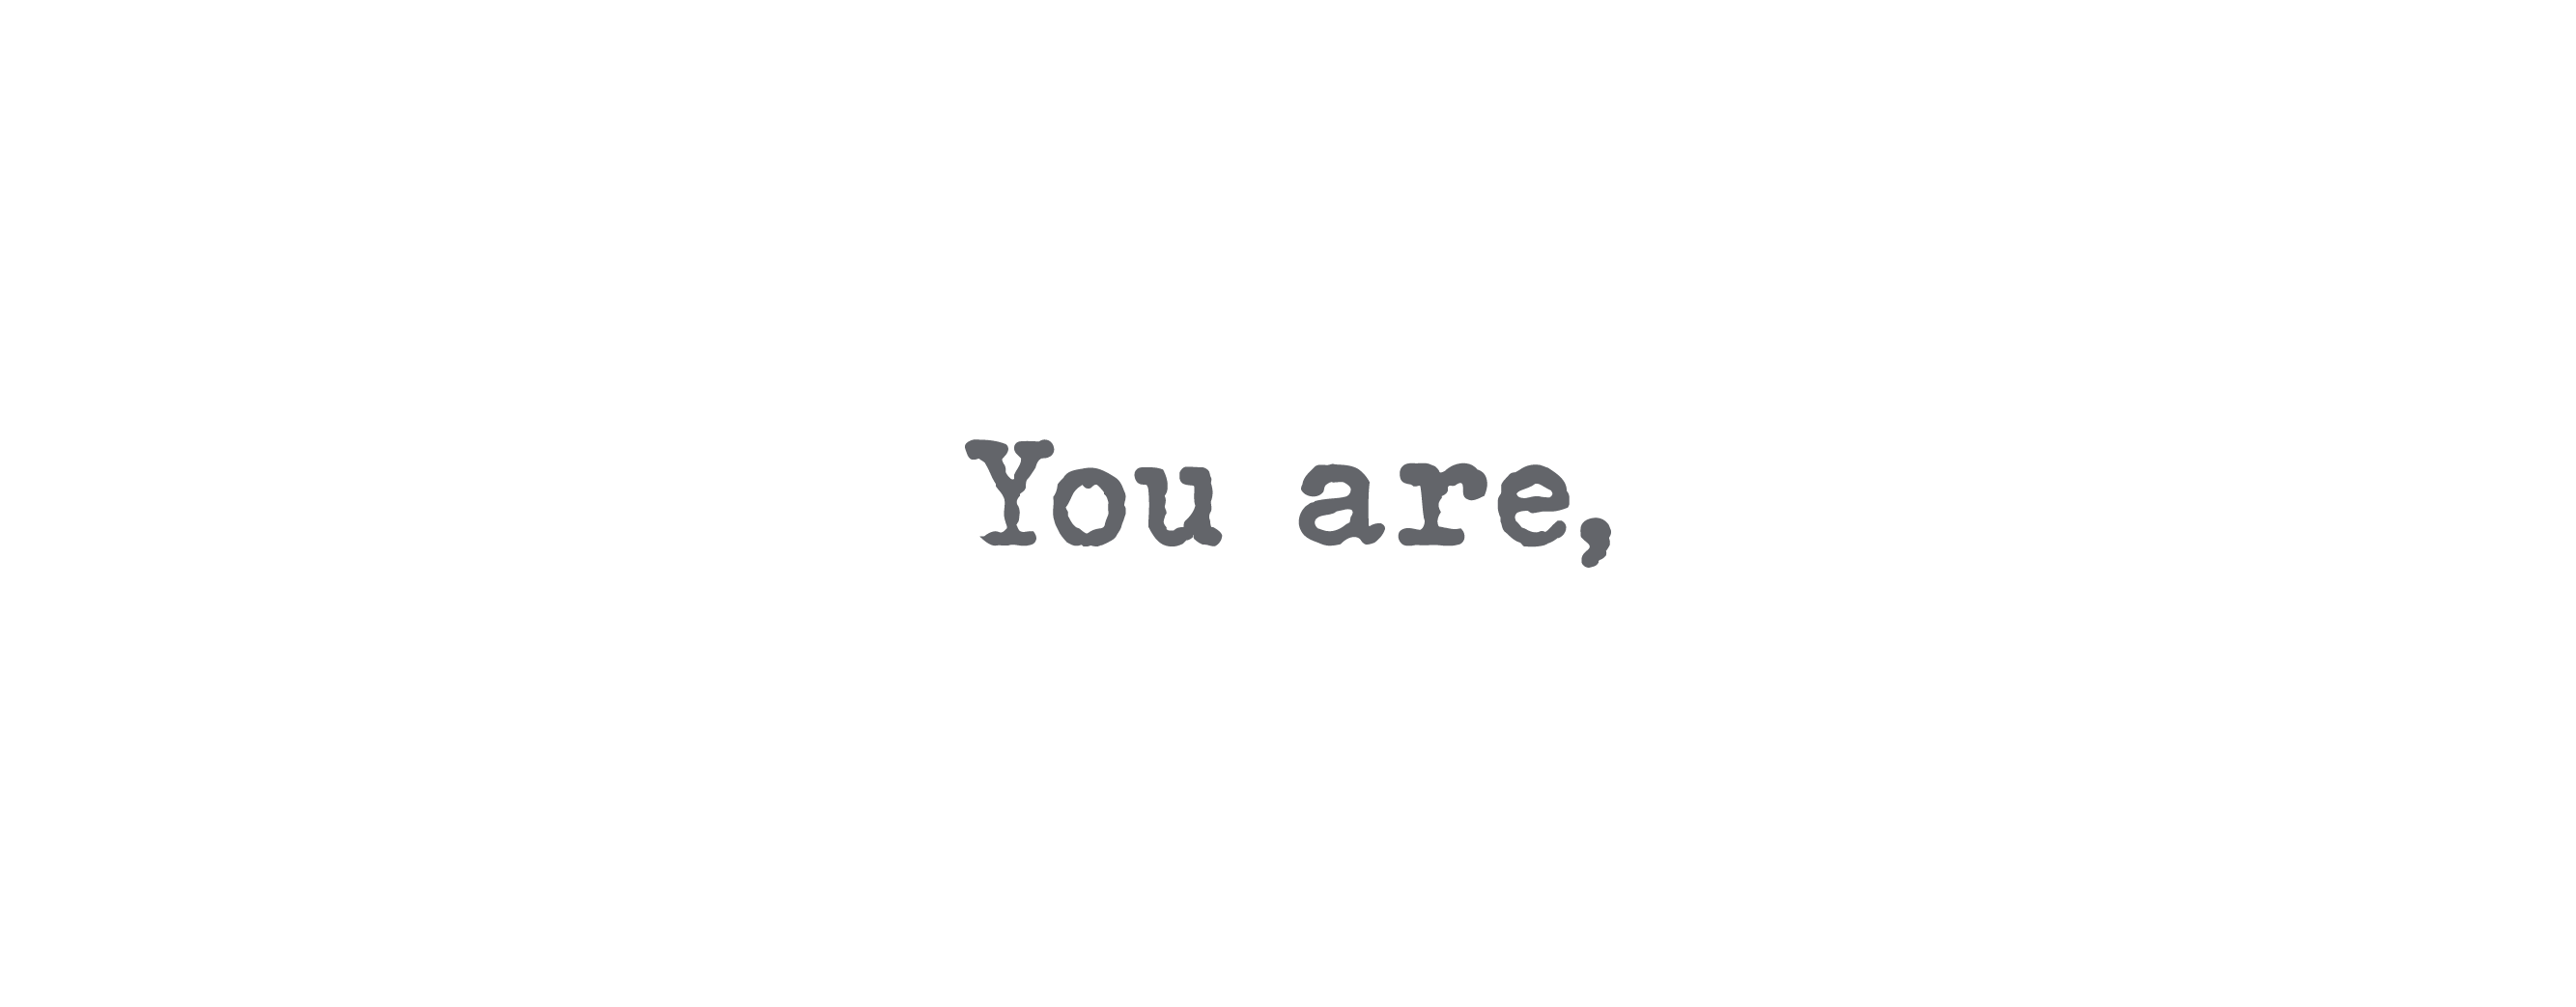 You are_ slides-01